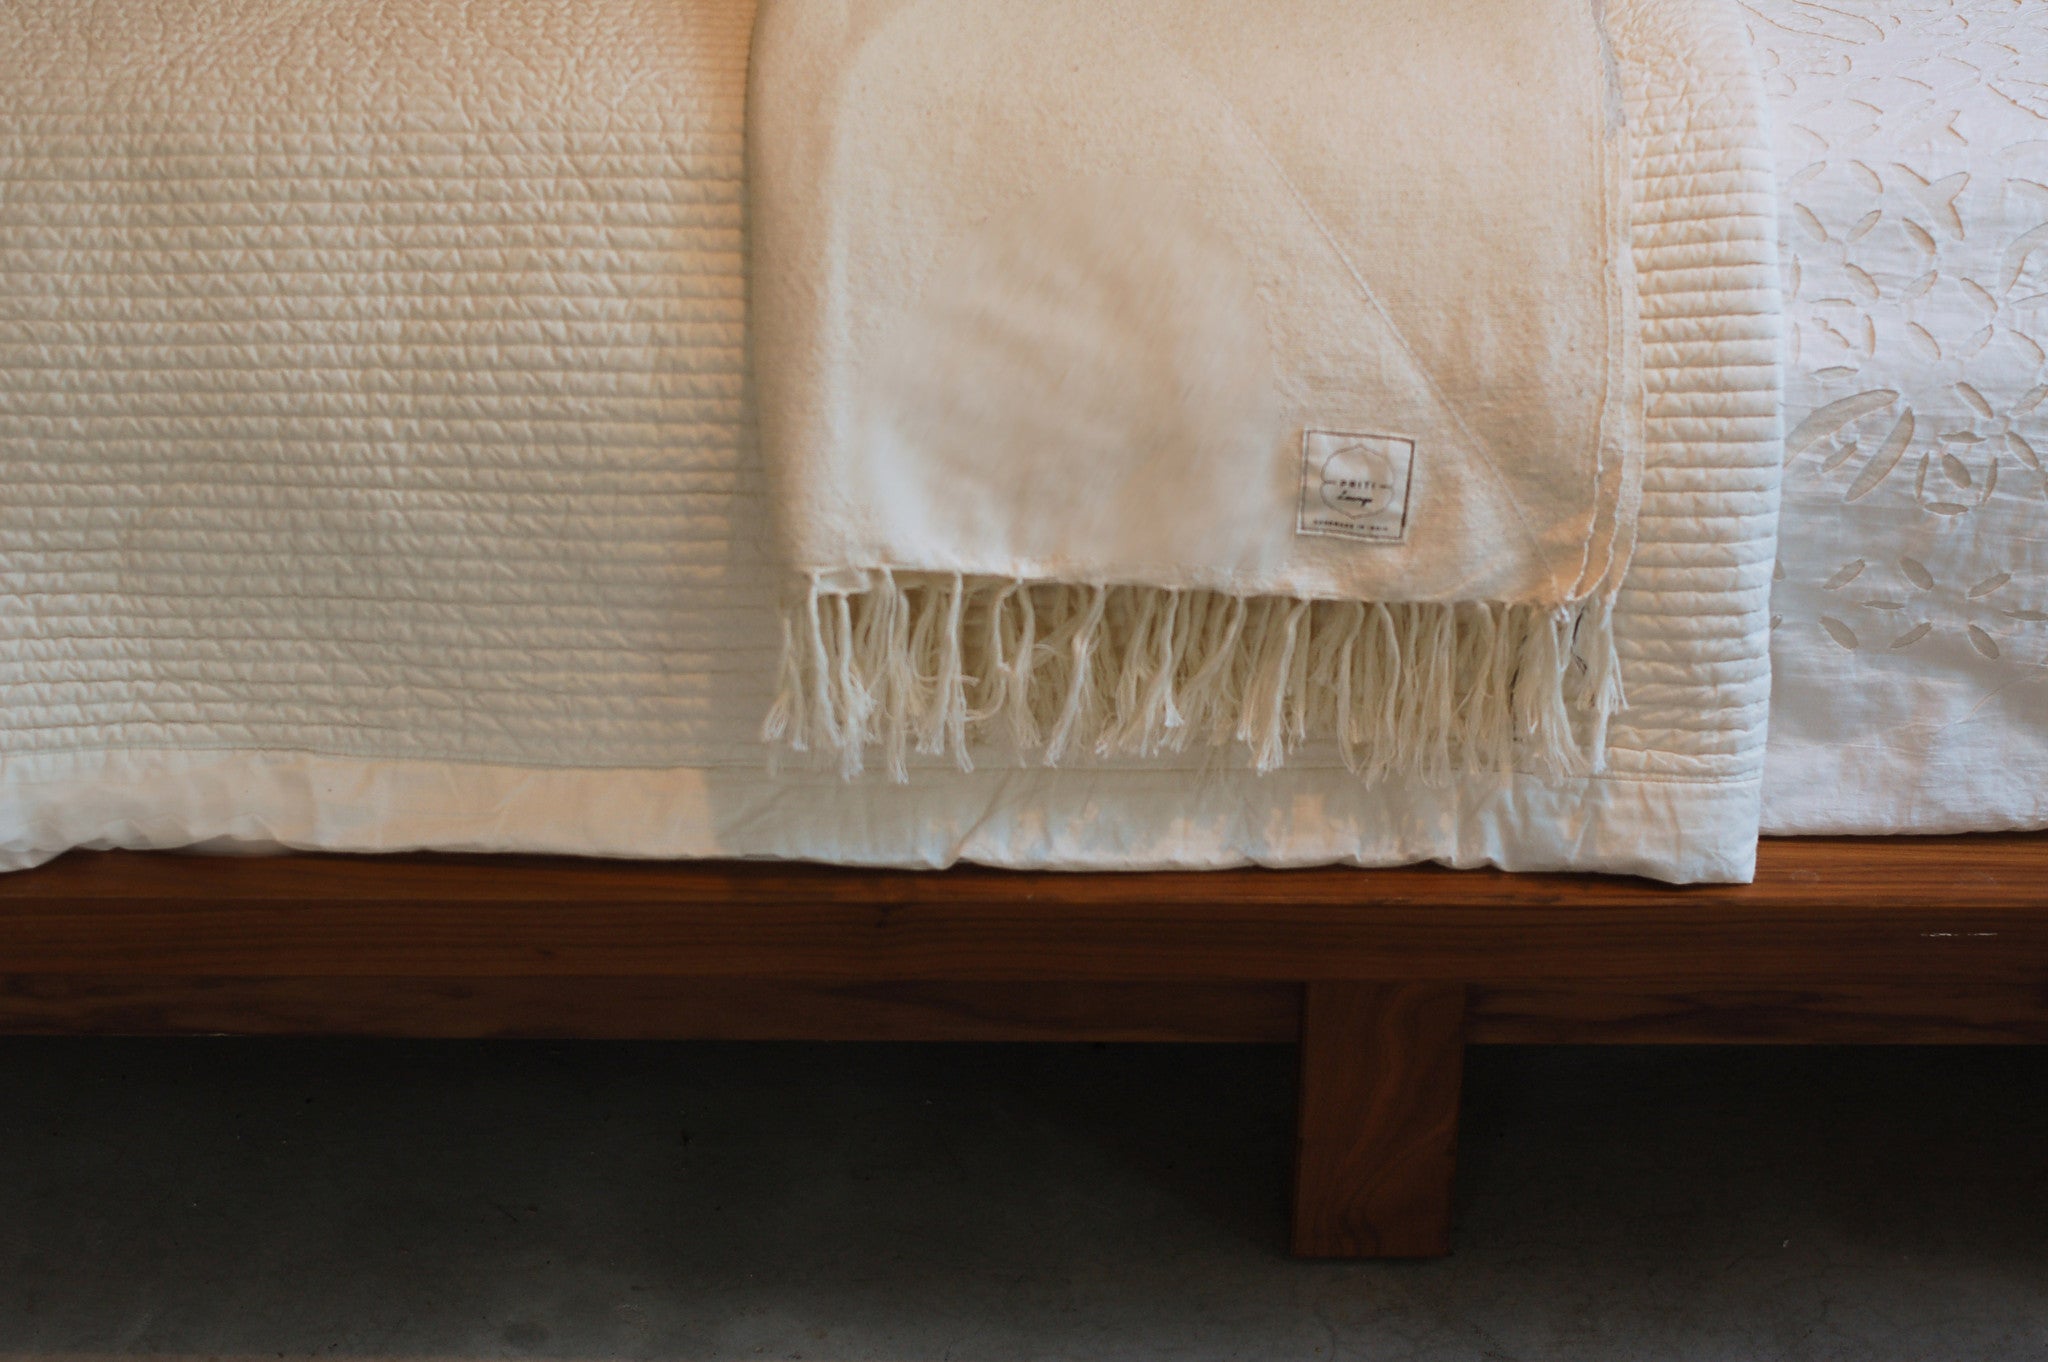 Handloomed, 100% cotton Level 4 sanctuary blanket. color : natural with light gray accent